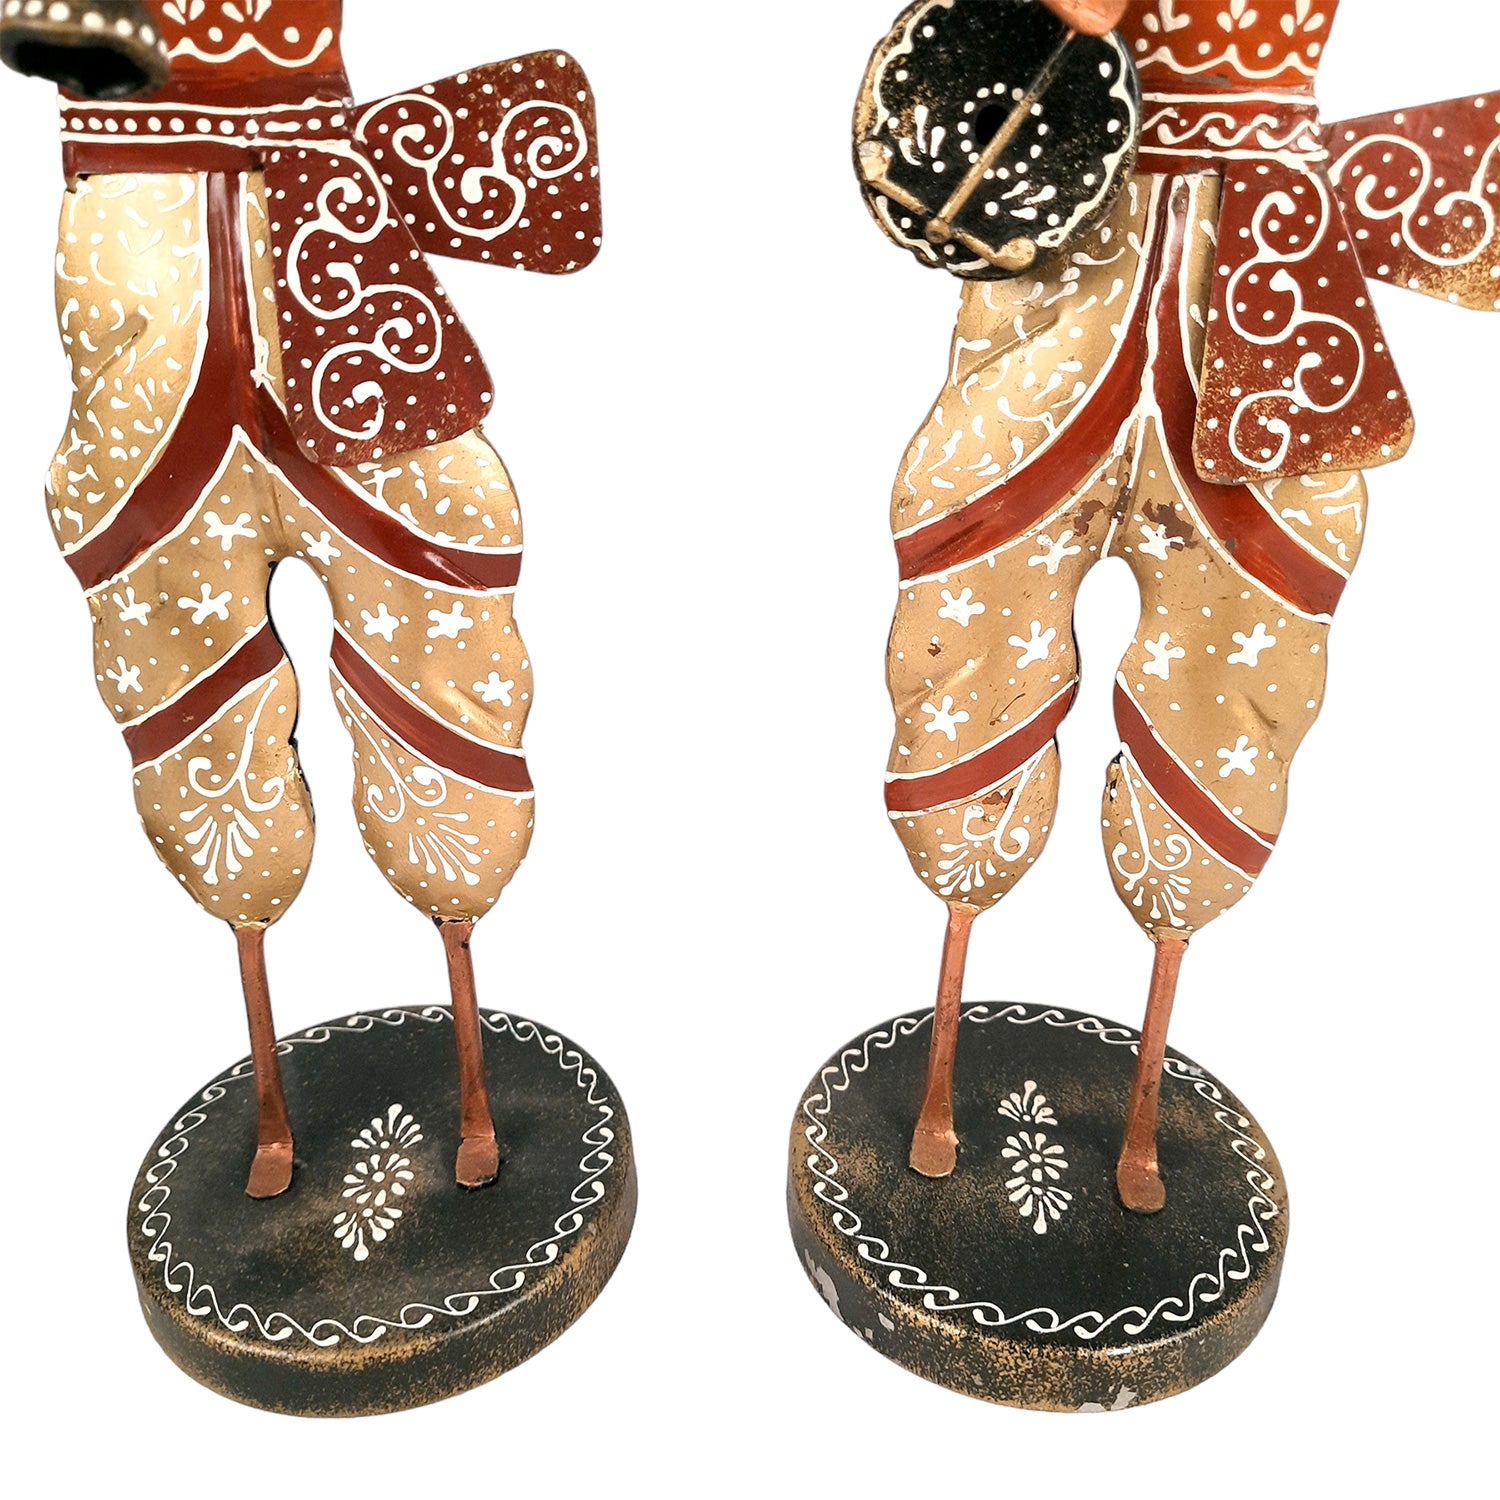 Musician Figurines - Musician Playing Dholak, Sitar & Shehnai - 14 Inch -Set of 3-Apkamart #style_Pack of 3